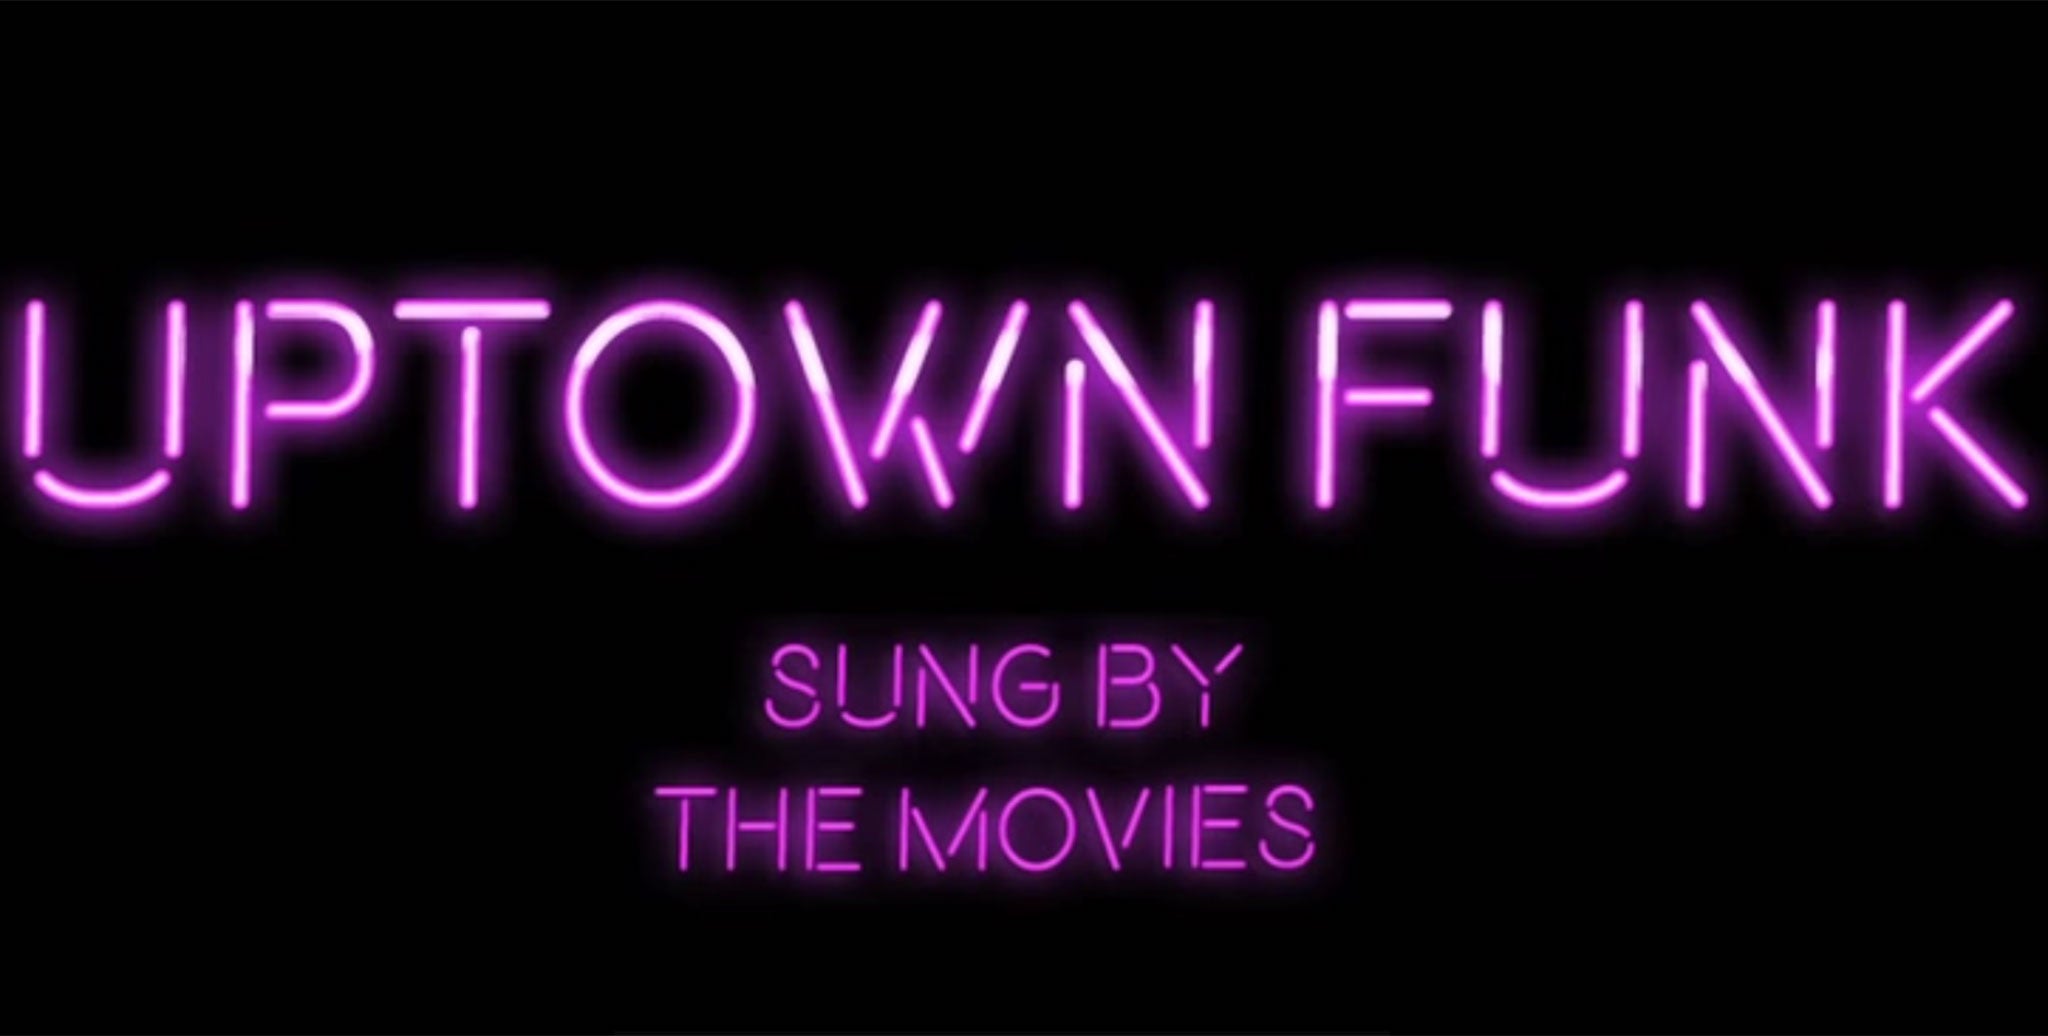 Lines from 280 movies make up one YouTube user's impressive 'Uptown Funk' cover video